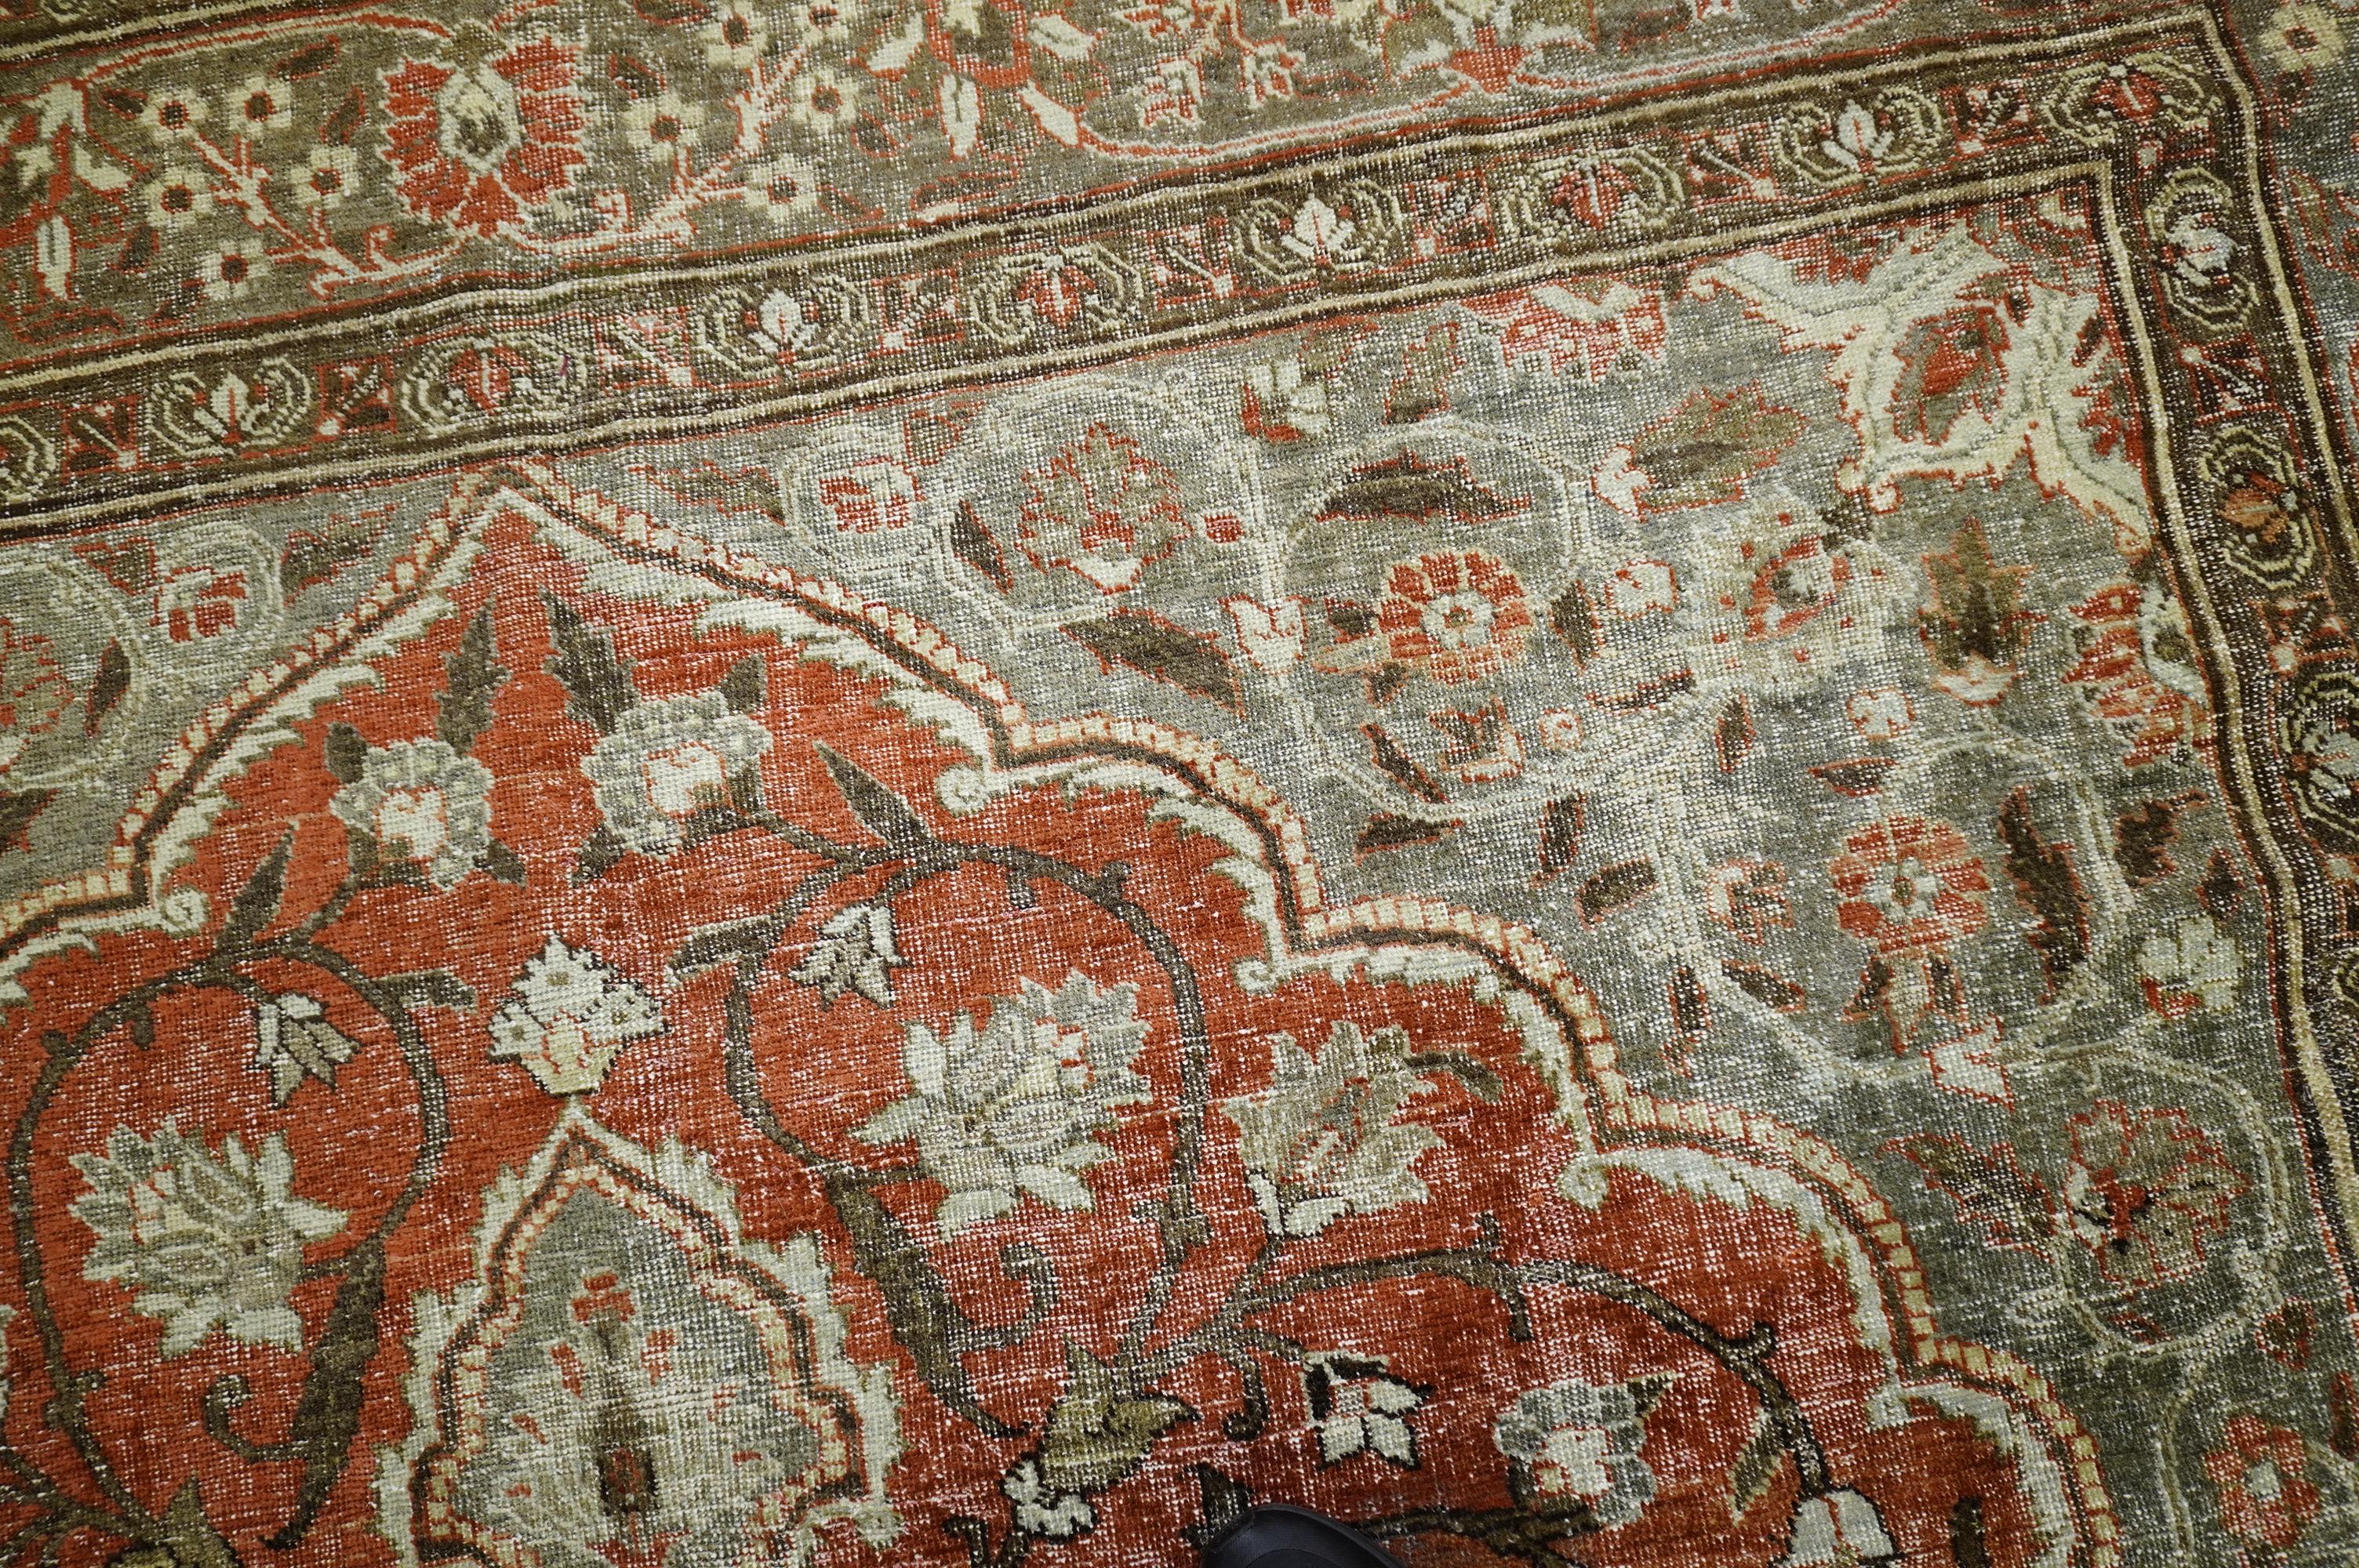 American Colonial Orange Shabby Chic Persian Tabriz Room Siize Rug, Early 20th Century